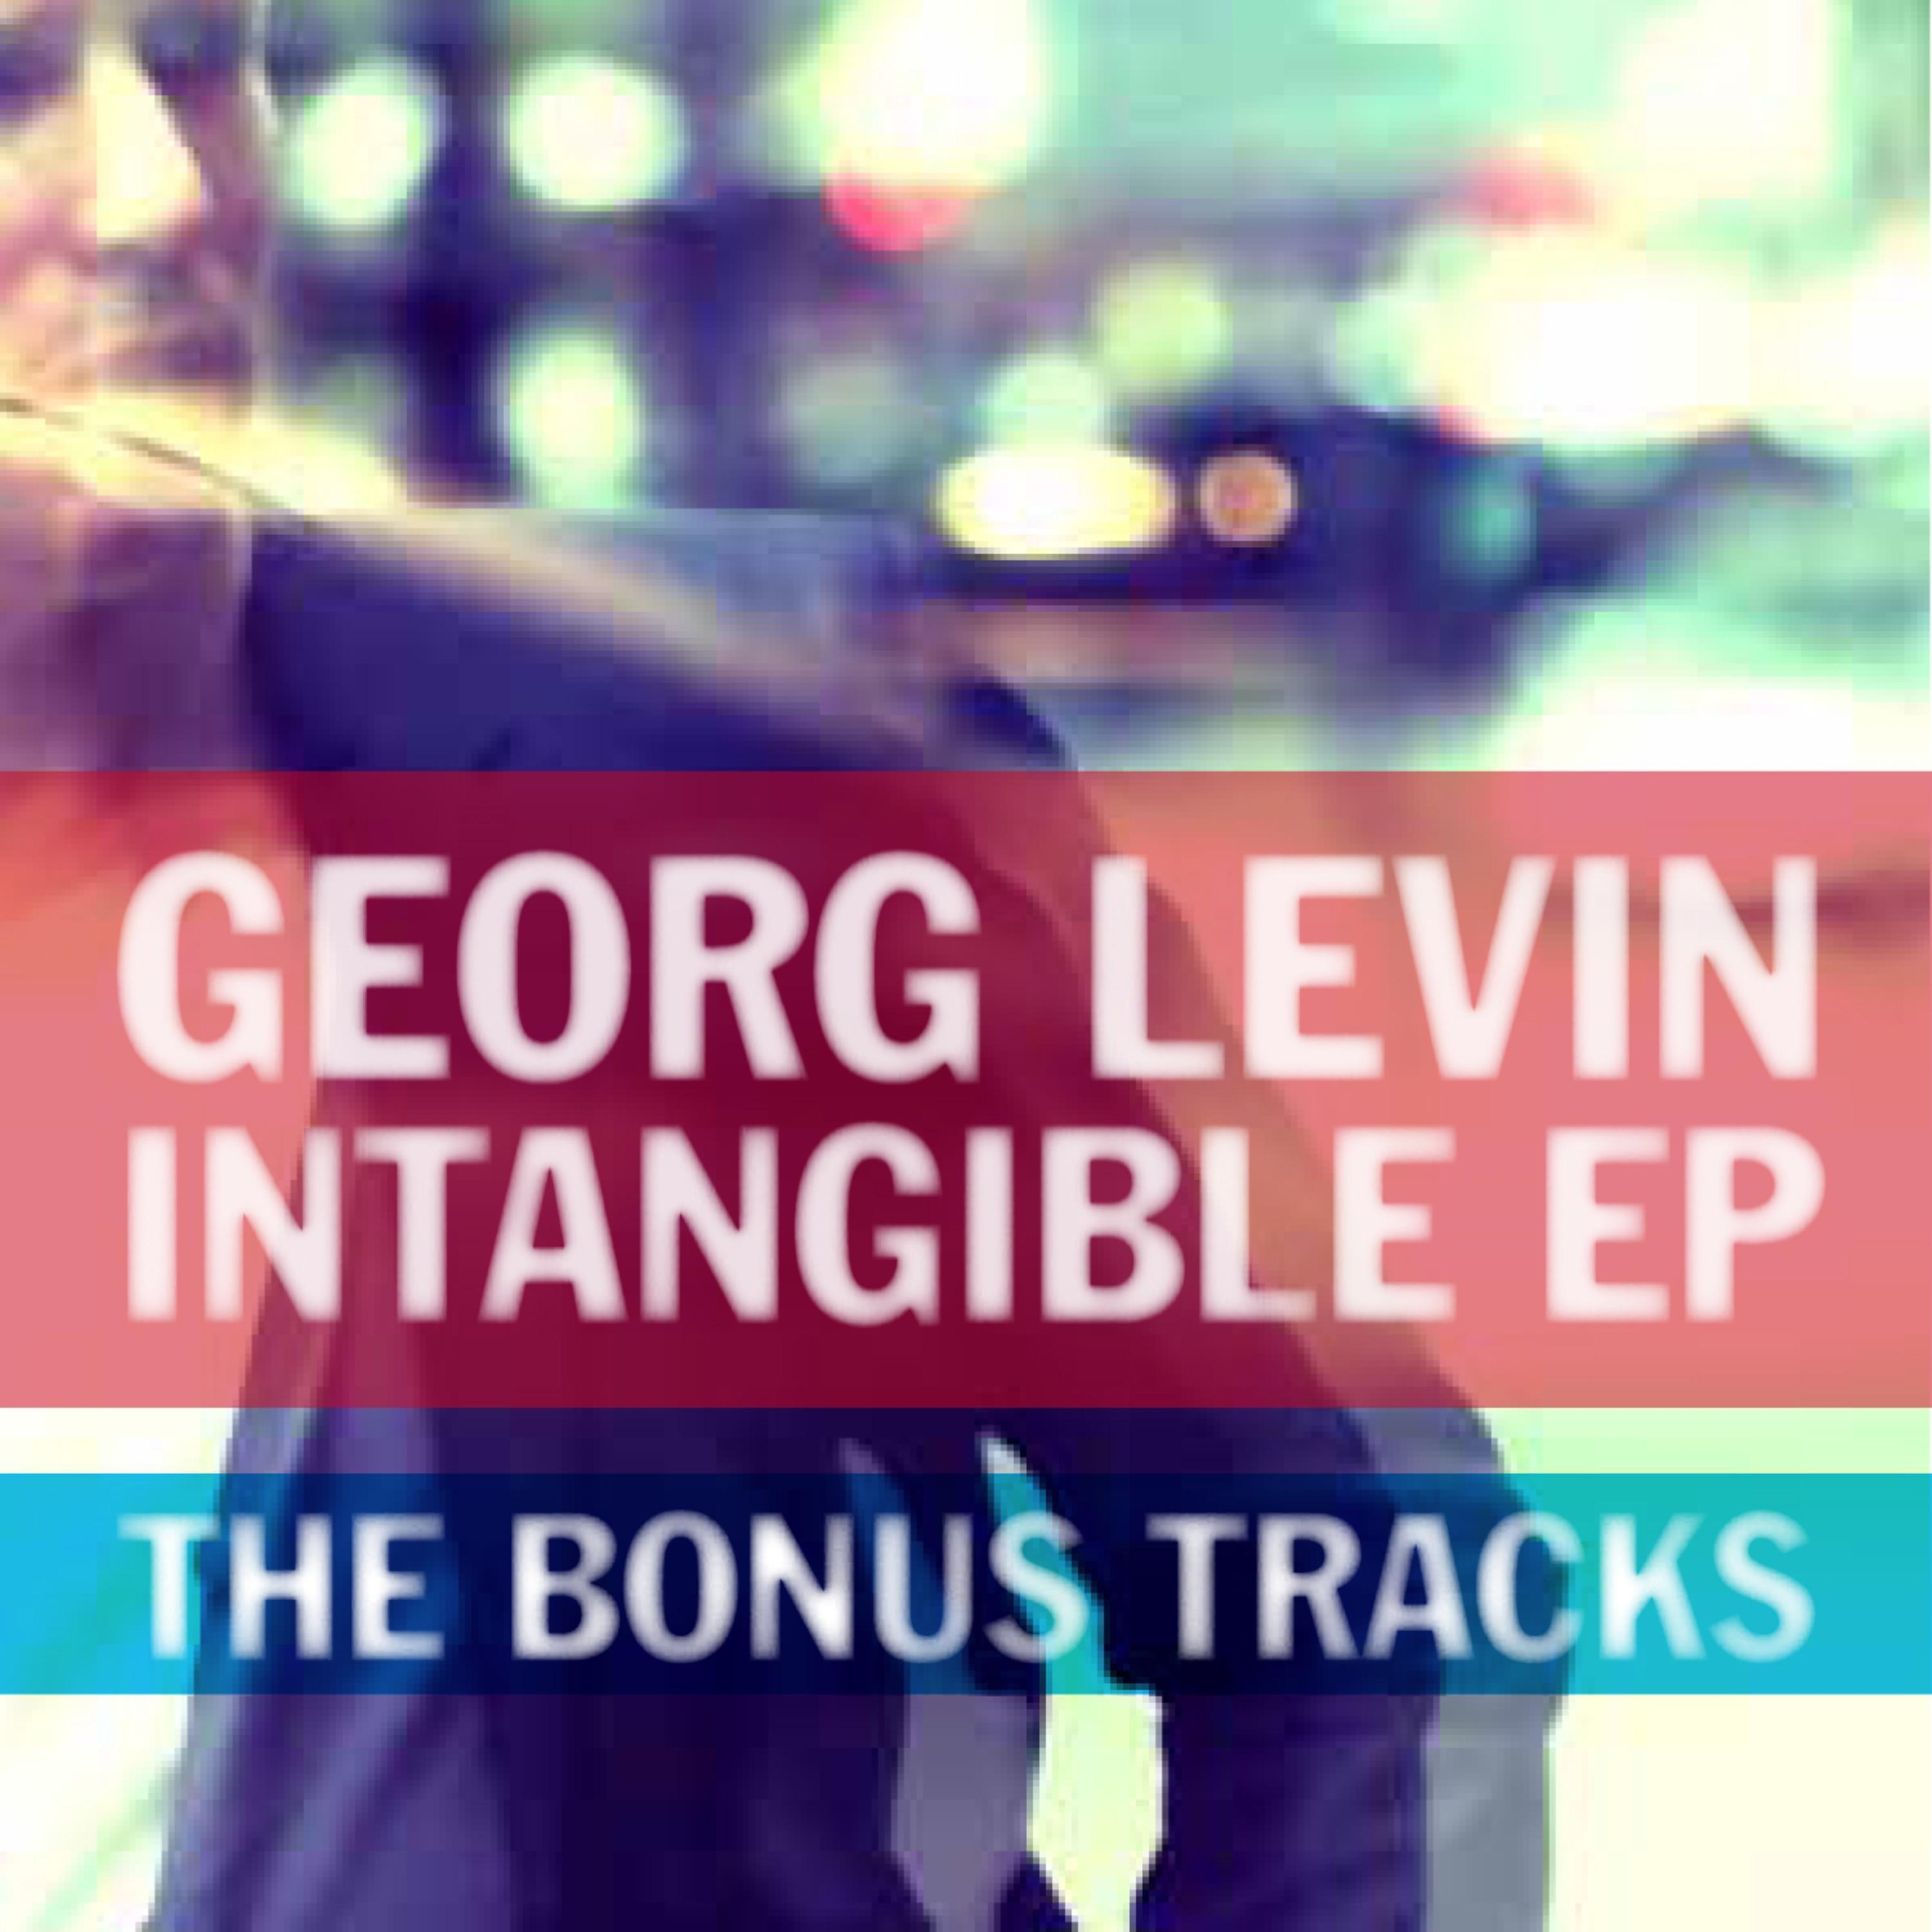 Intangible (Lp Vocal Version)